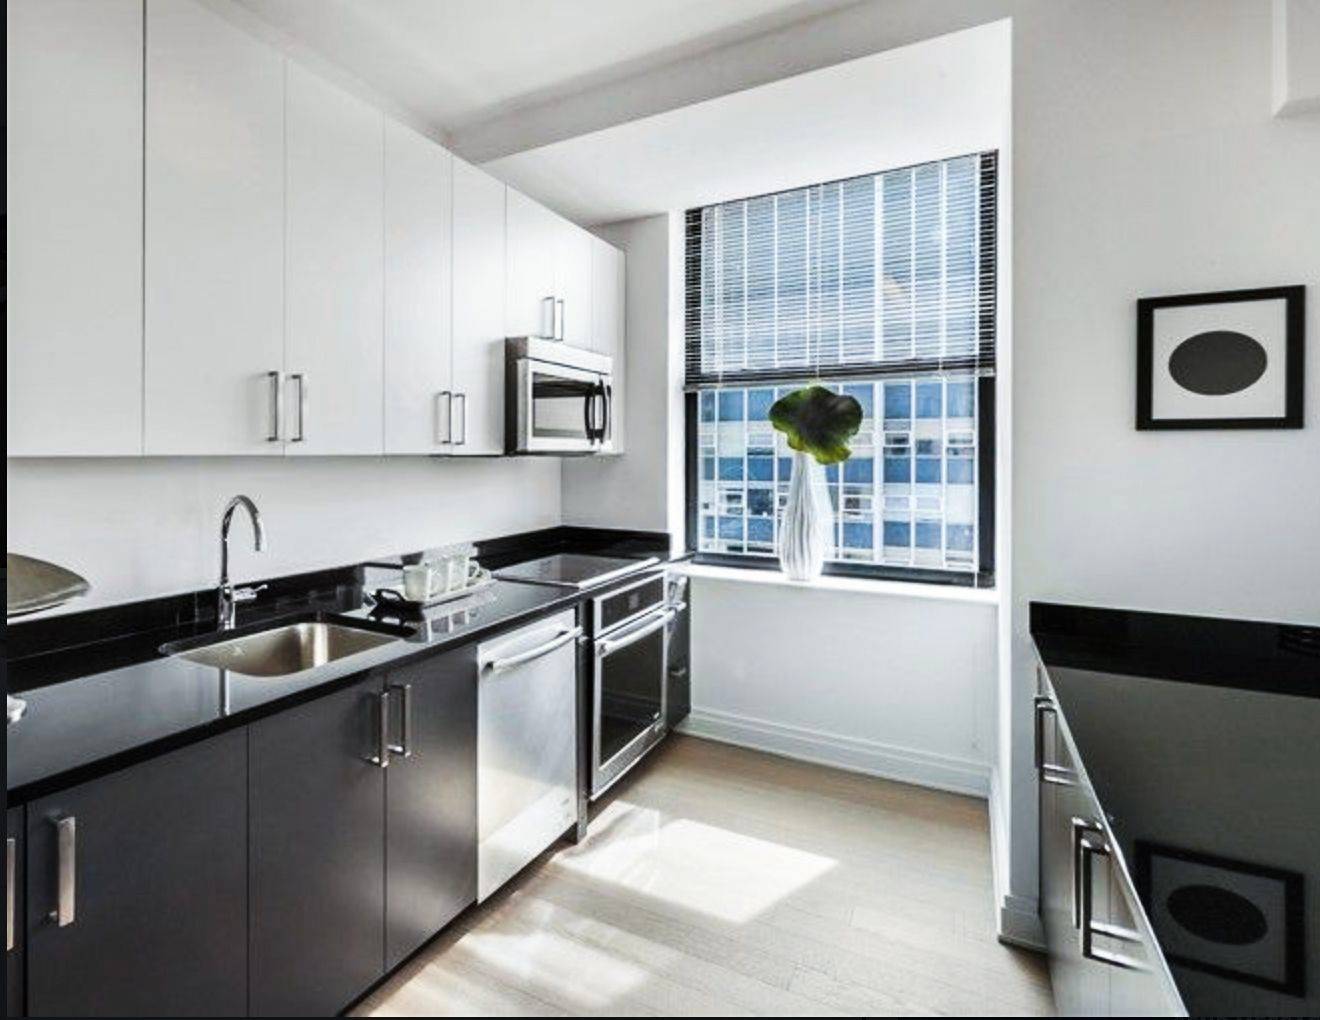 70 Pine is the premier address in the Financial District with superior custom designed oversized residences featuring washer dryers, soaring ceilings, and meticulous finishes, in addition to white glove services ...